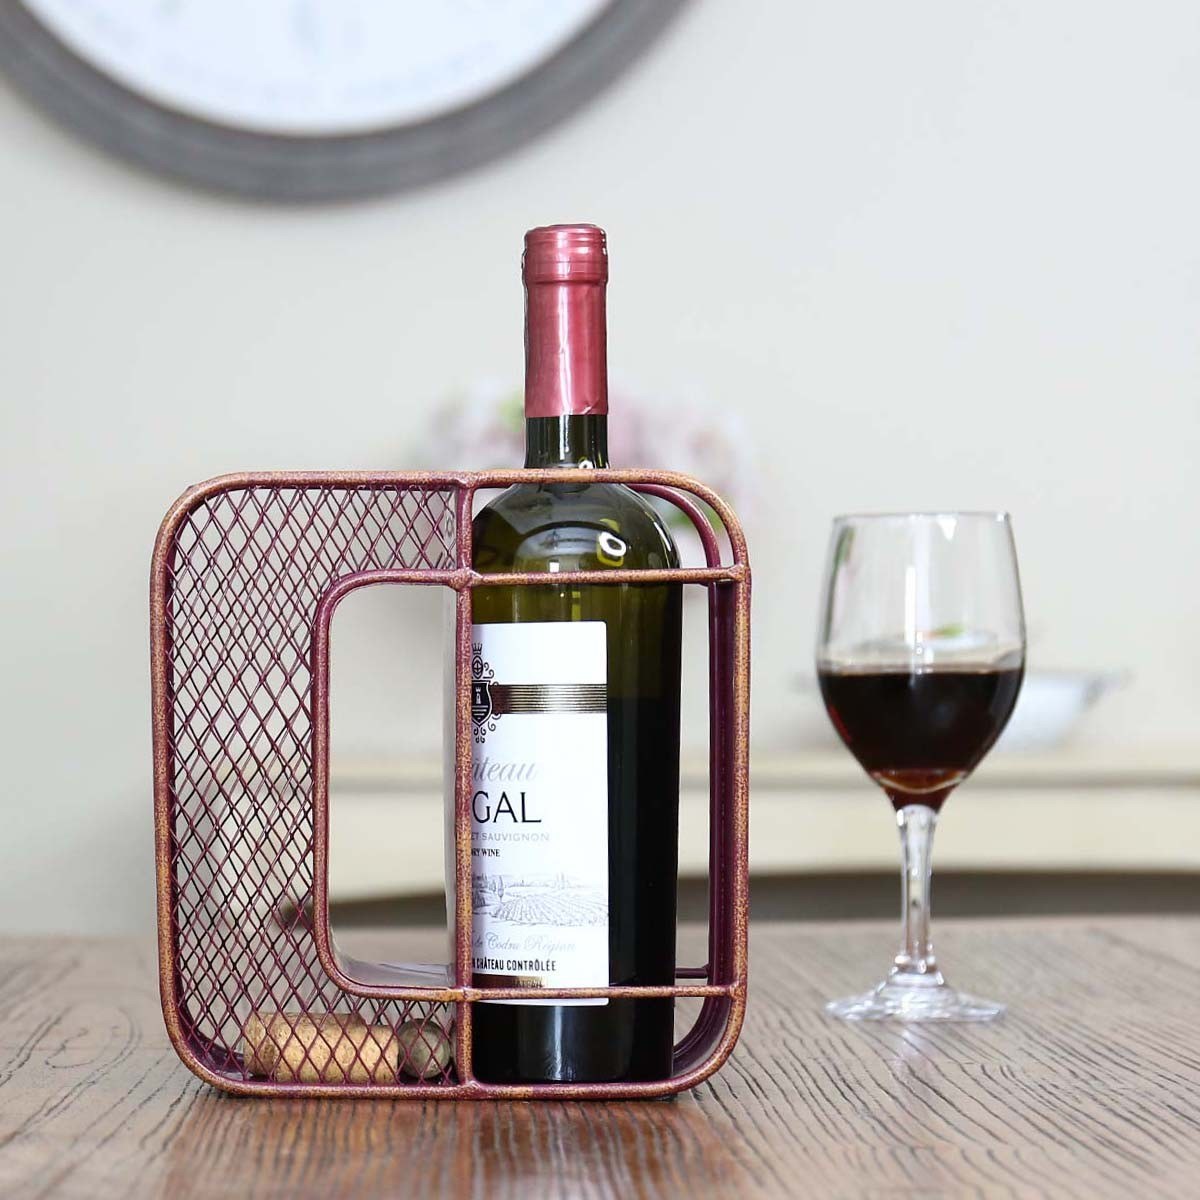 Letter "O" is a decorative items to your single wine bottle holder